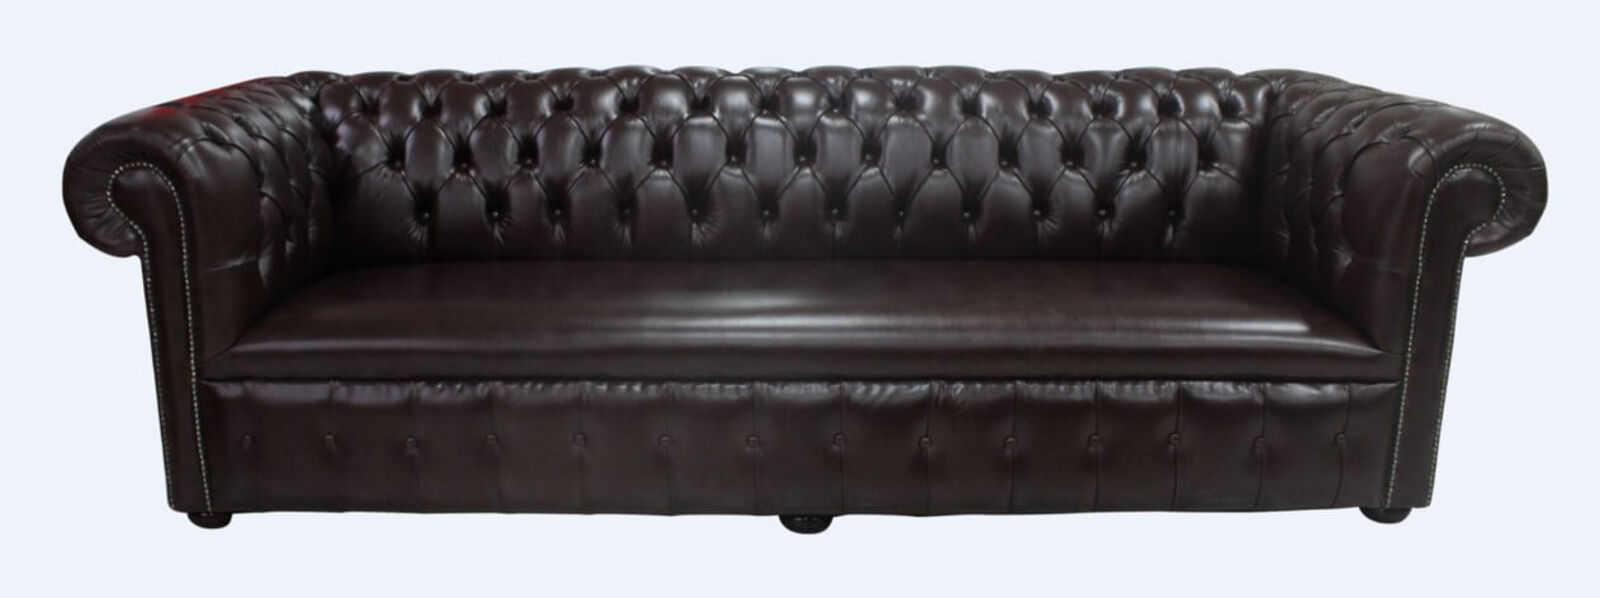 Product photograph of Chesterfield 1780 S 4 Seater Settee Old English Dark Brown Leather Sofa Offer from Designer Sofas 4U